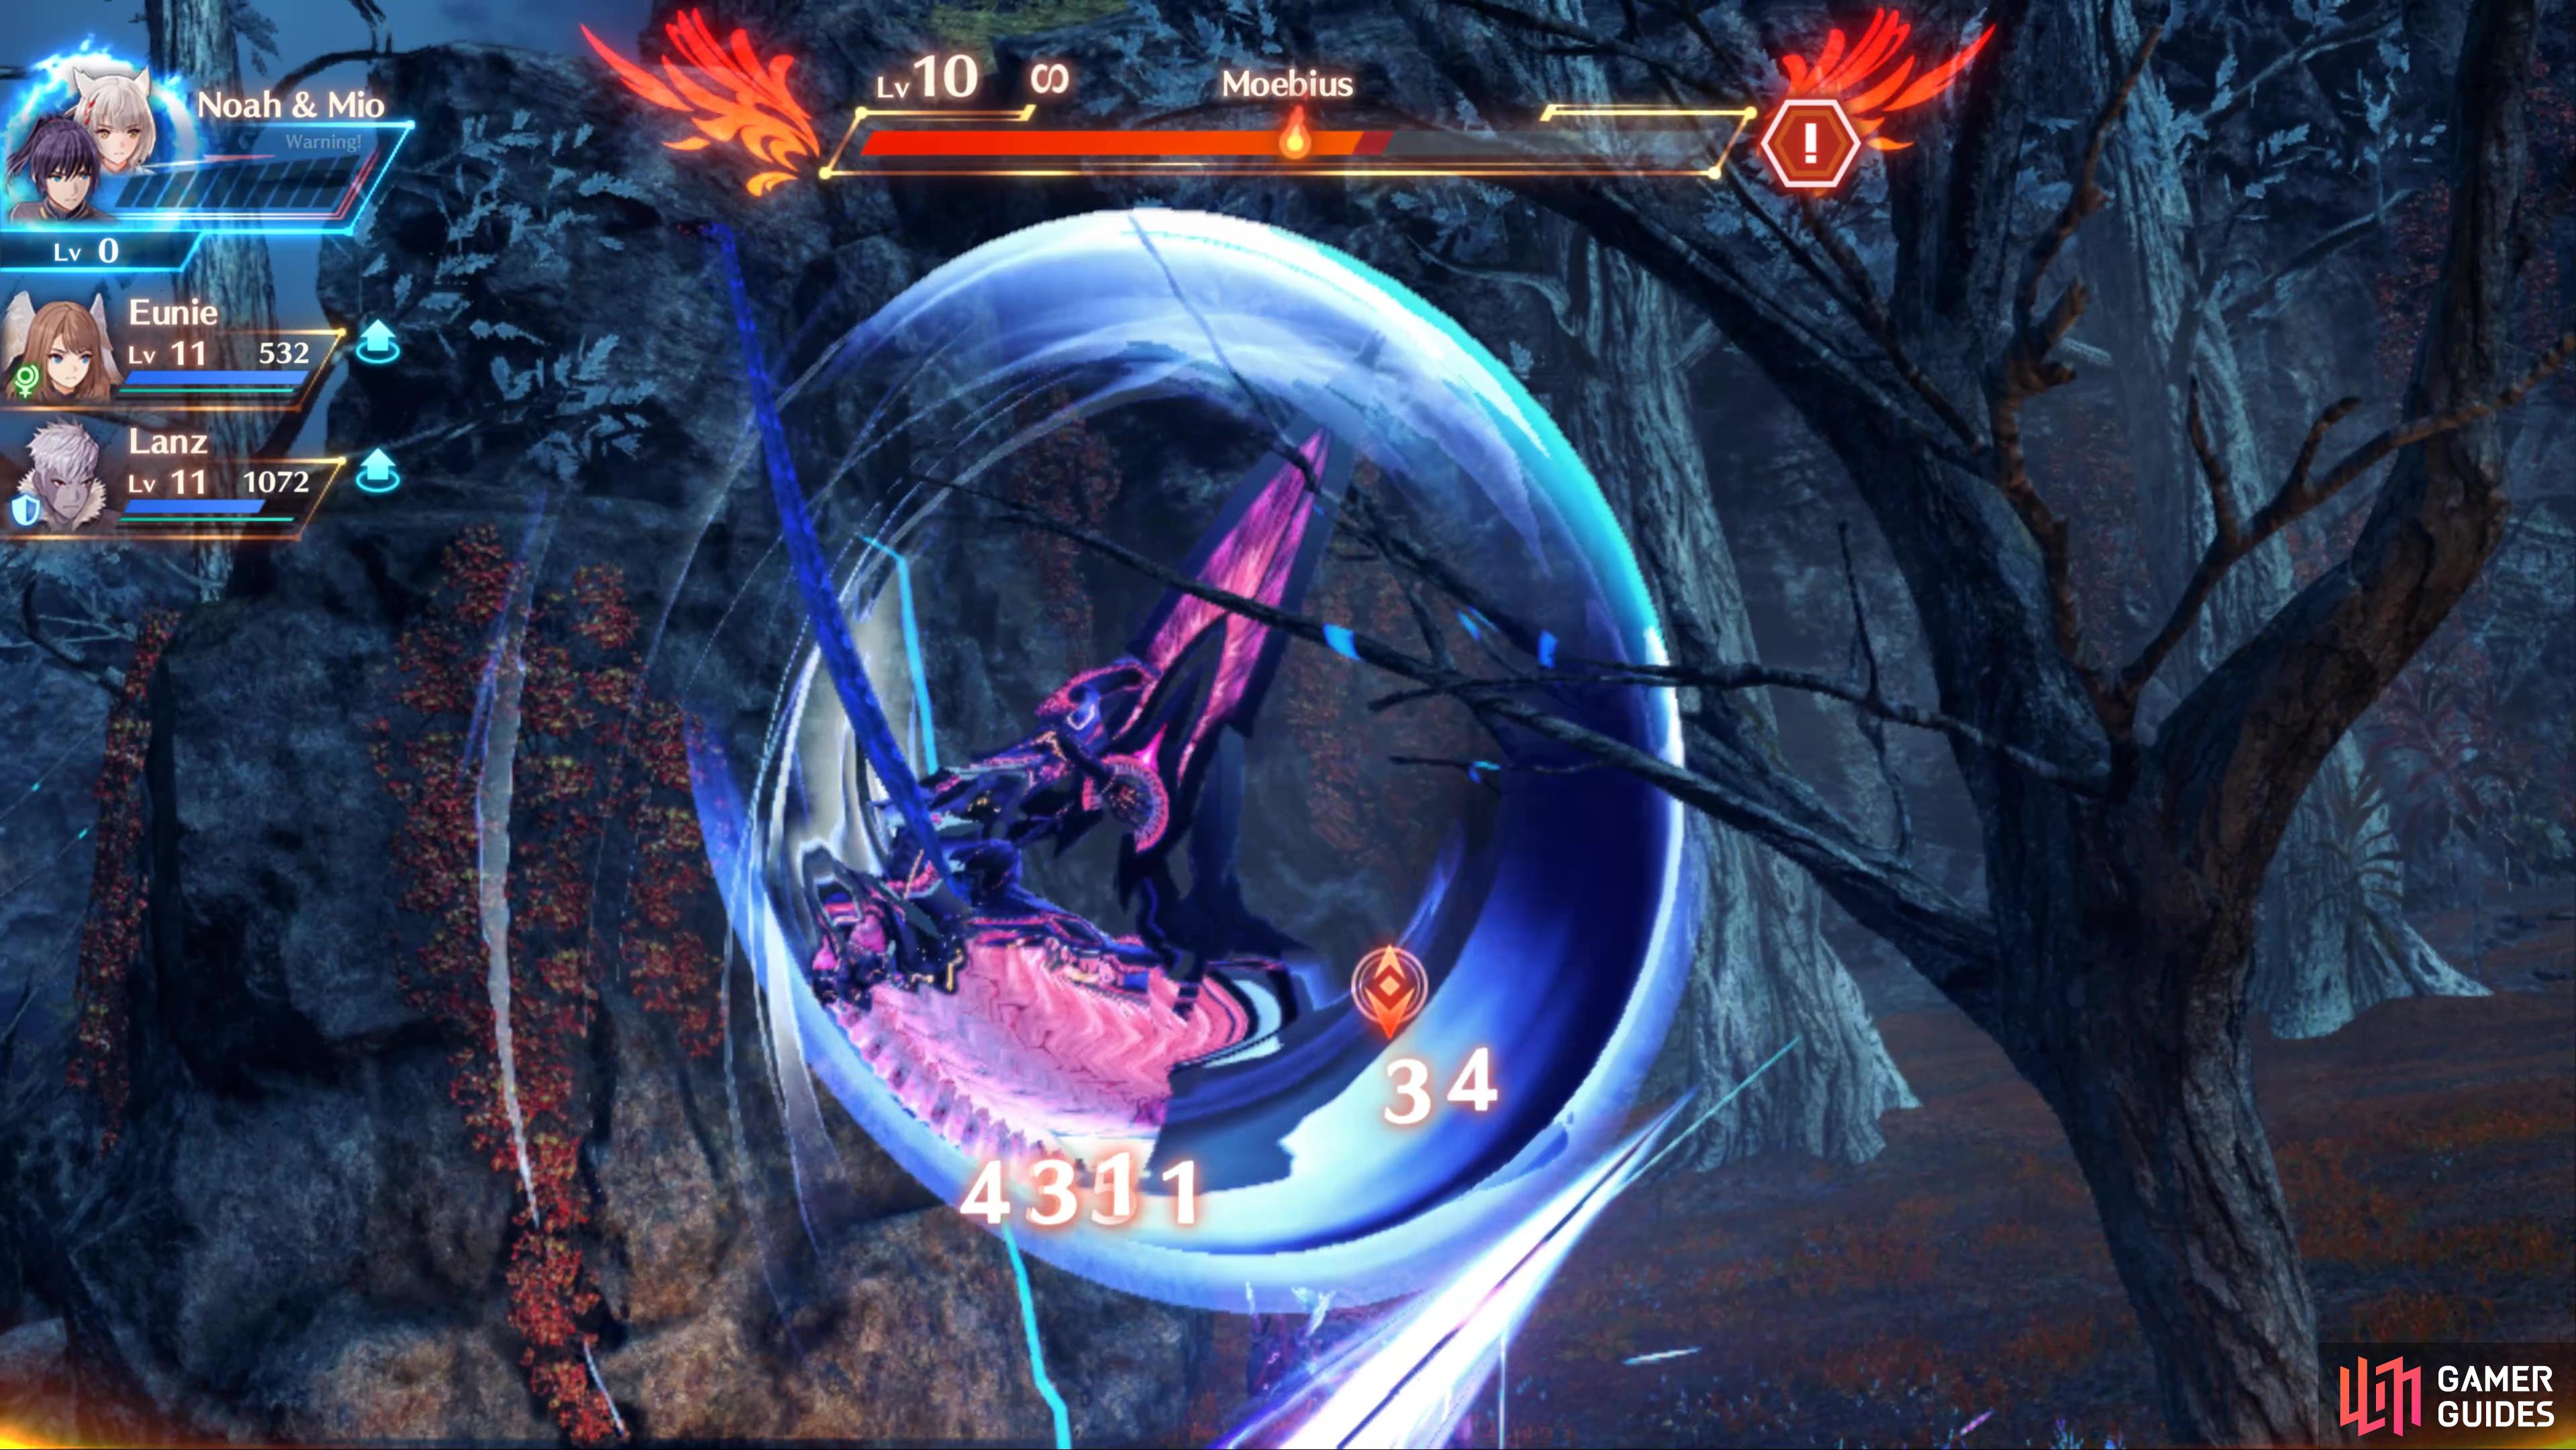 use Mega Spinning Edge as it becomes available to deal major damage to Moebius.